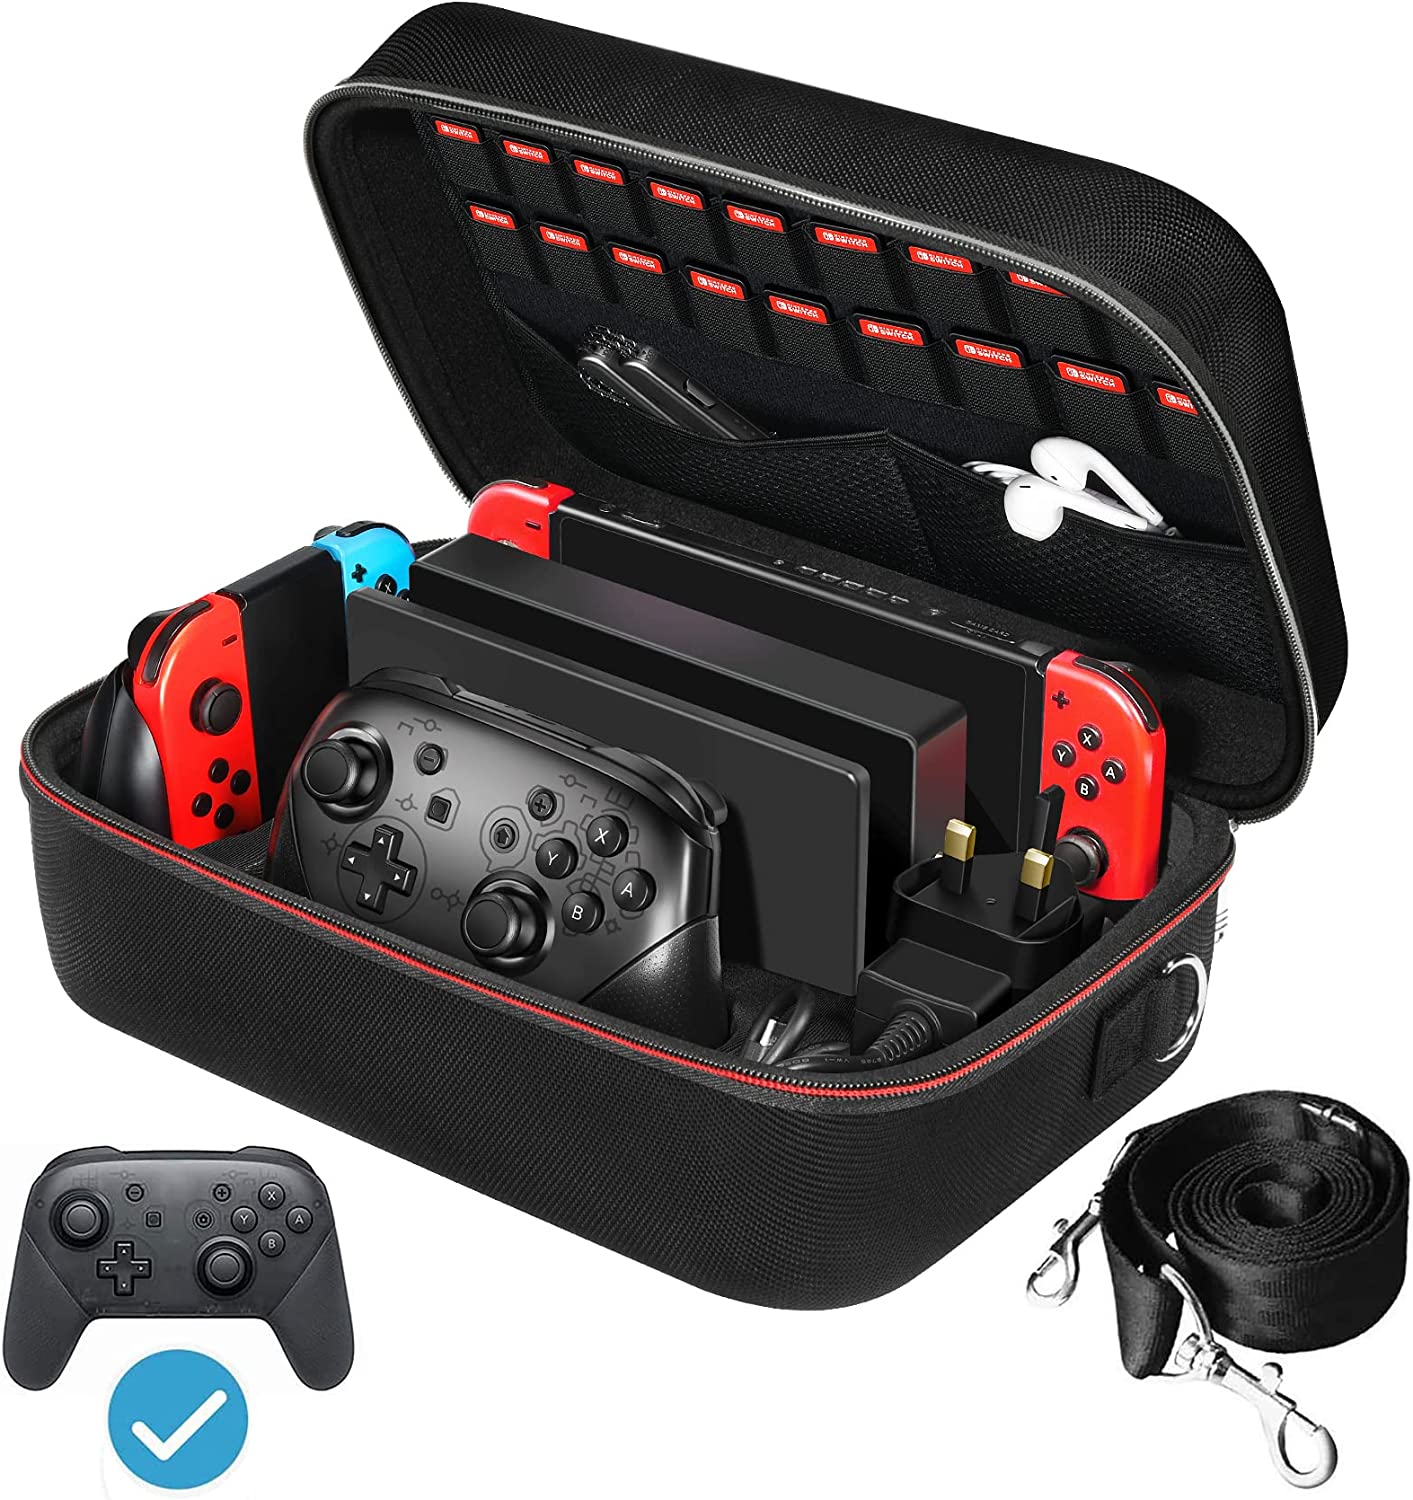 iVoler Carrying Storage Case for Nintendo Switch.